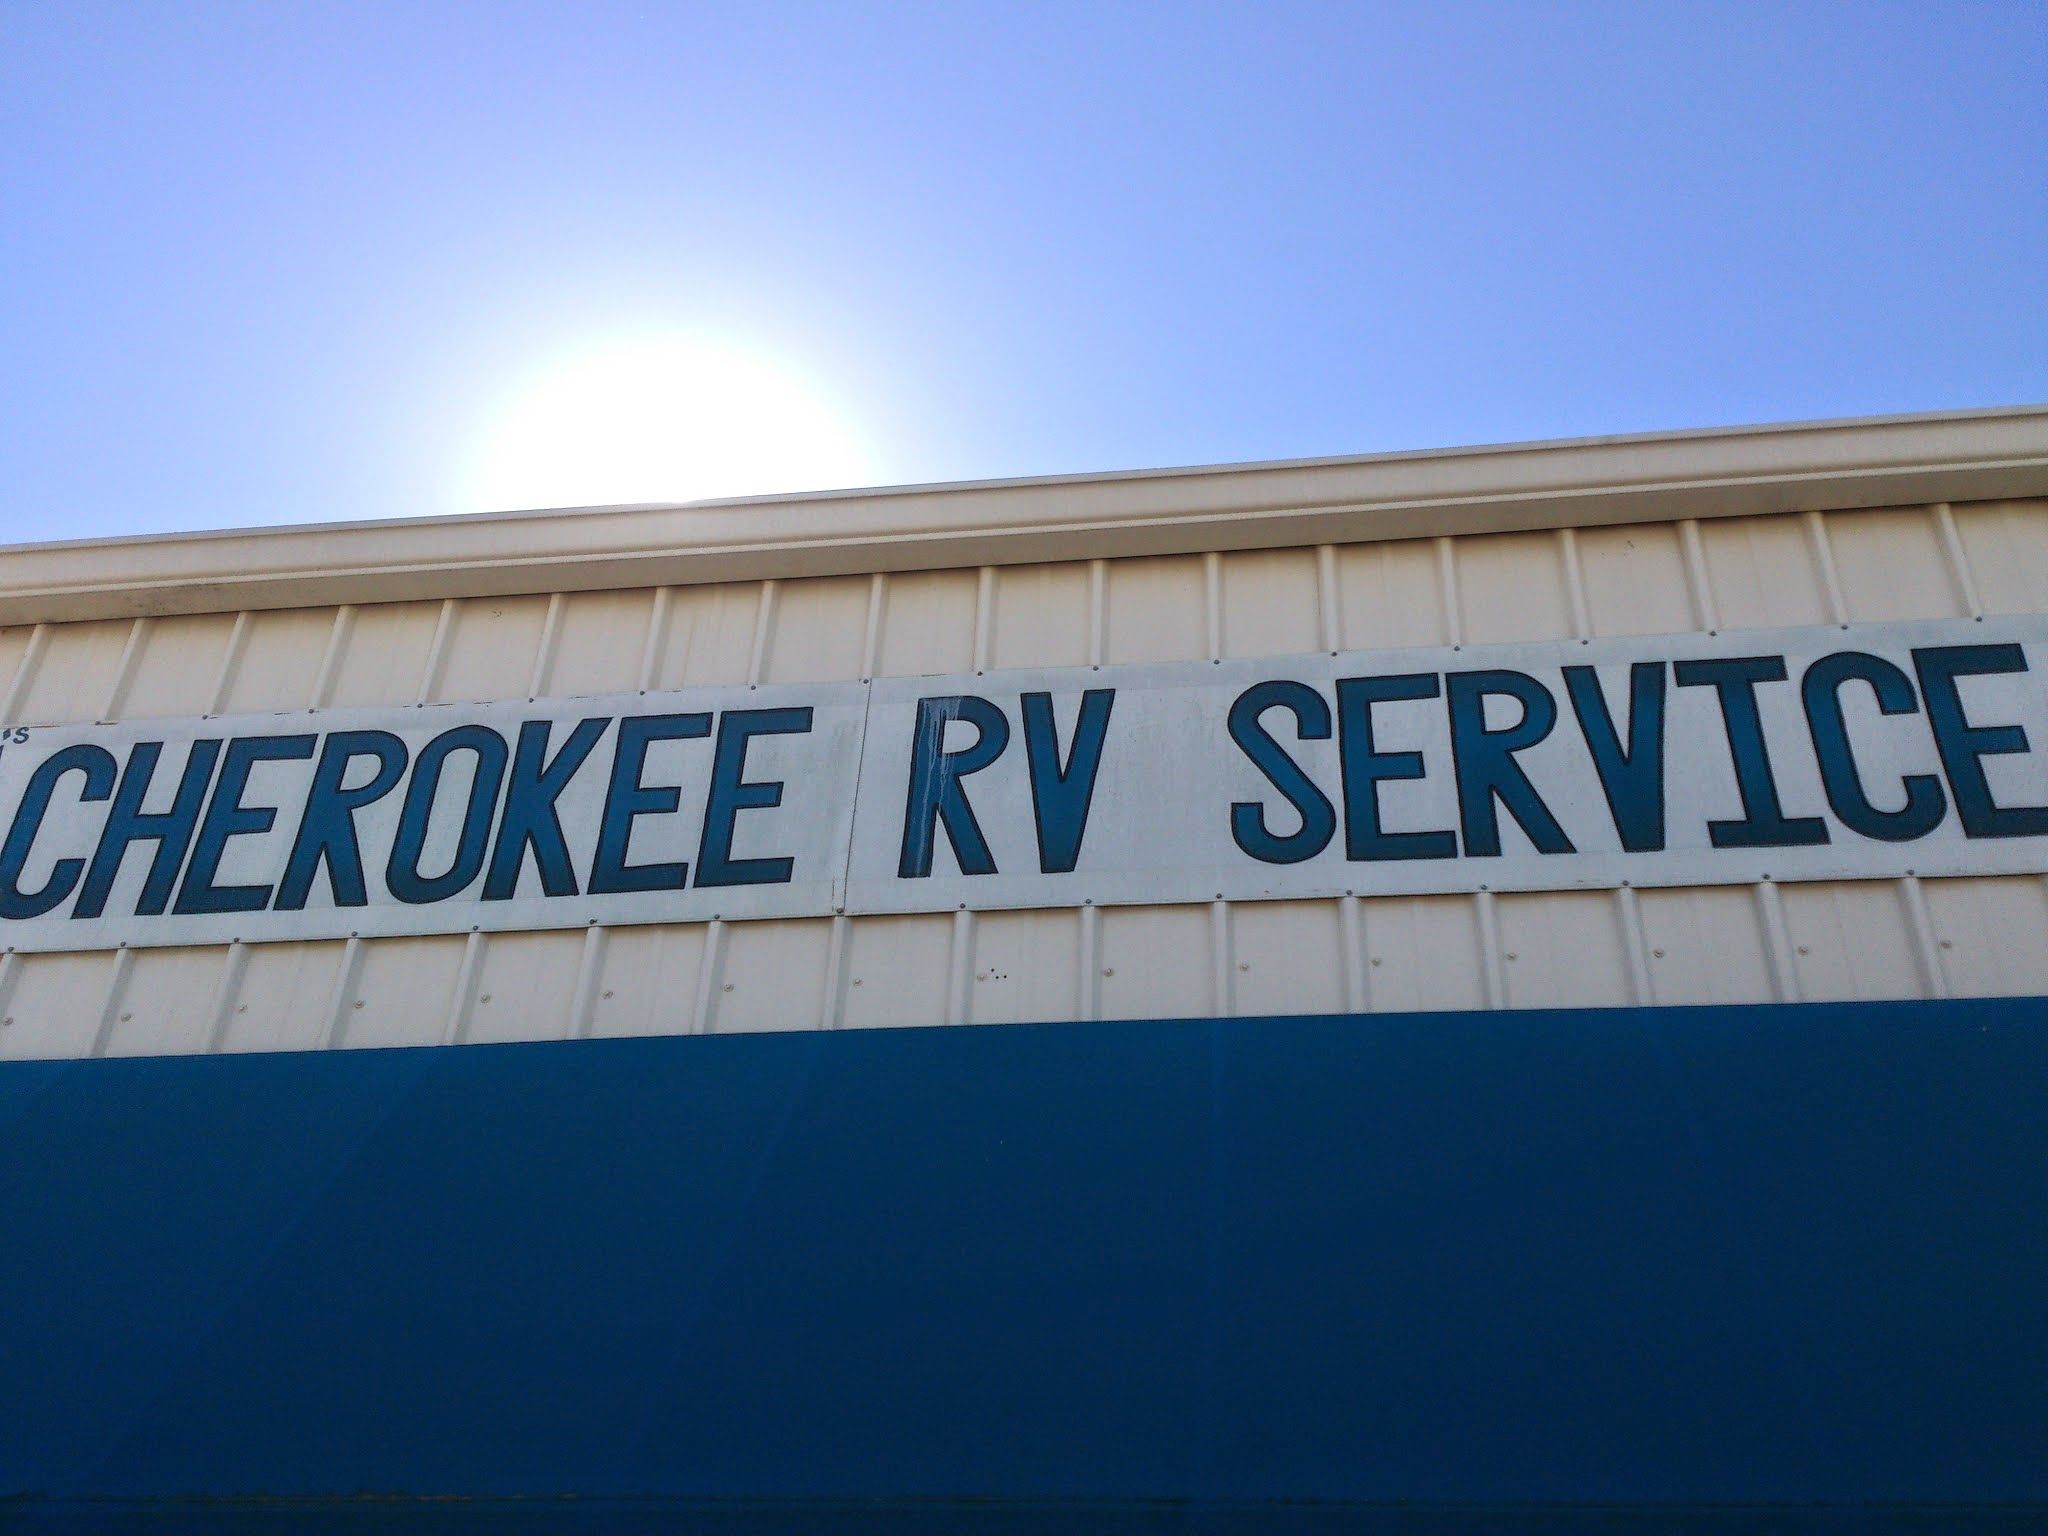 Services & Products The CherokeeRV Service in Stockton CA